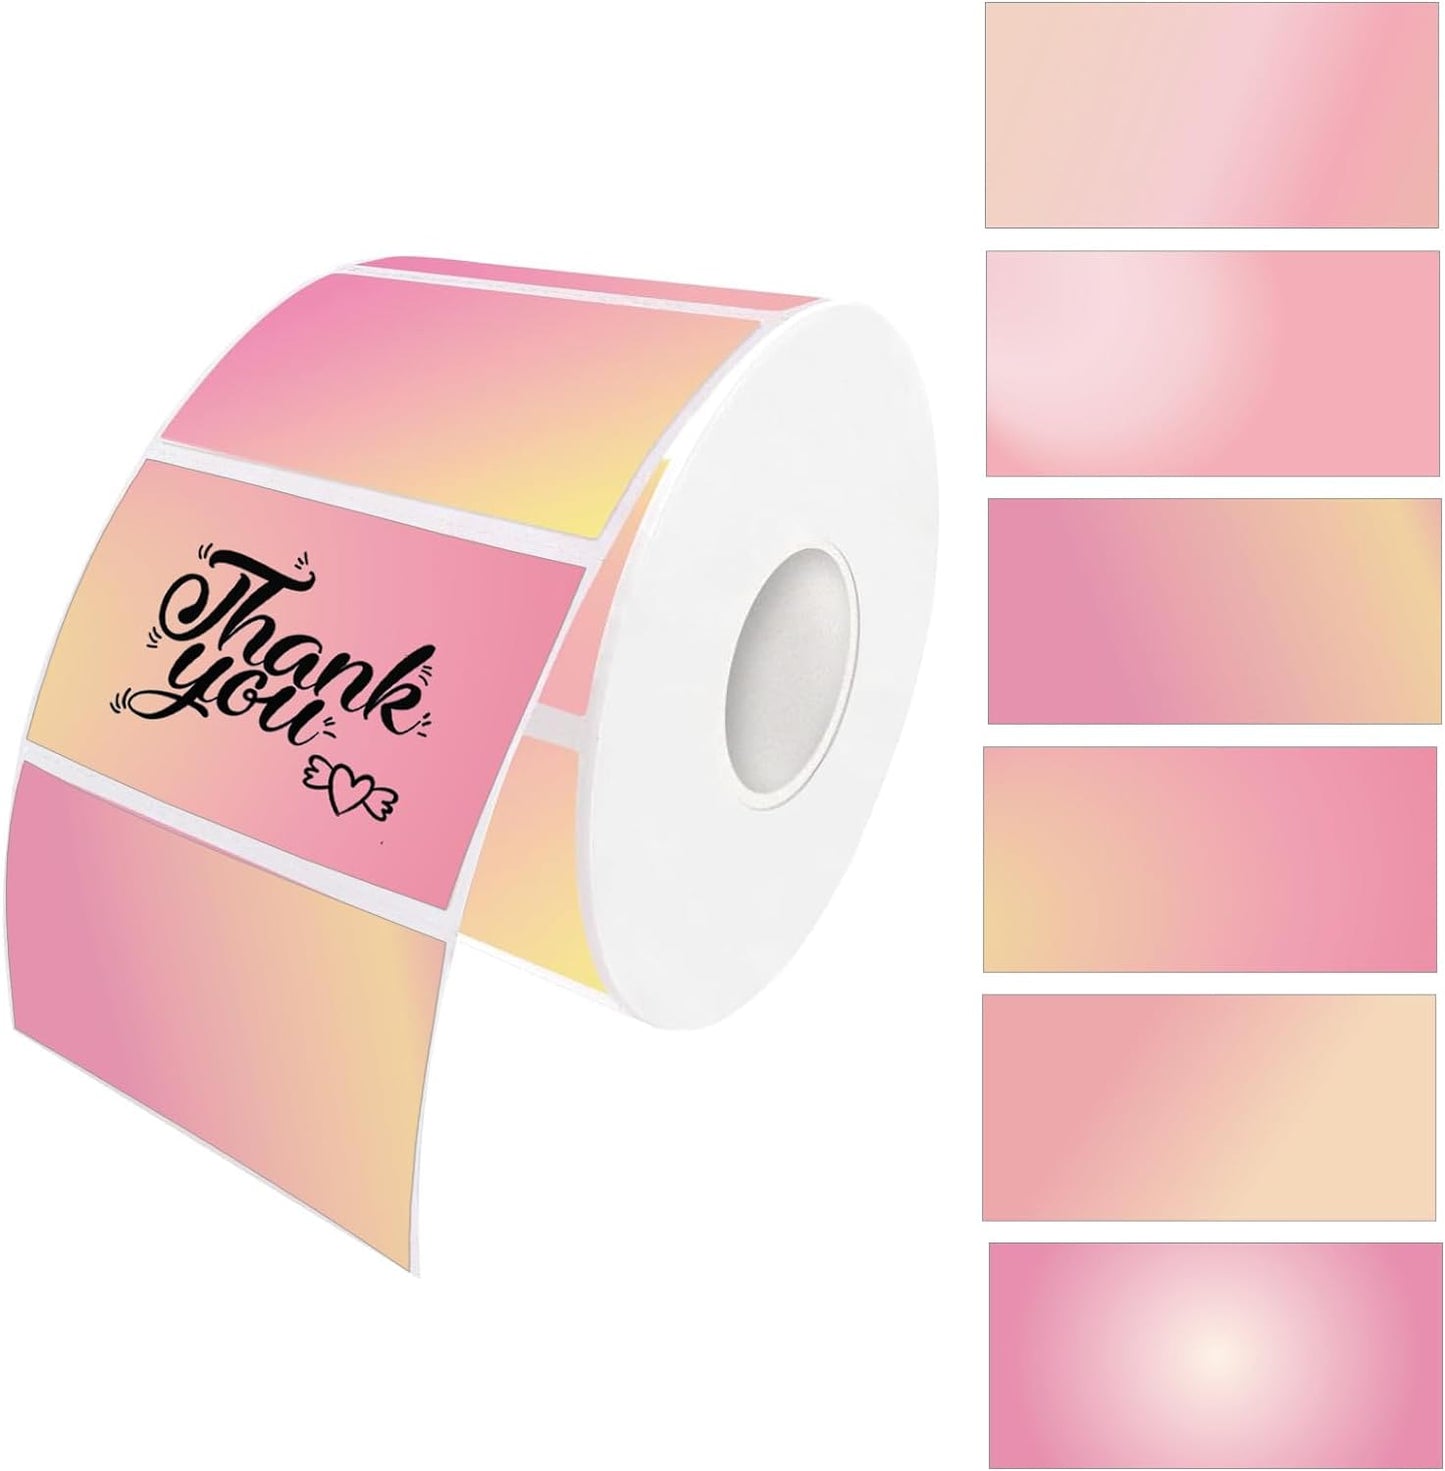 Thermal Printer Labels  - Small Business Supplies, Packaging Stickers - Freshie Scent Stickers -  2.25x1.25